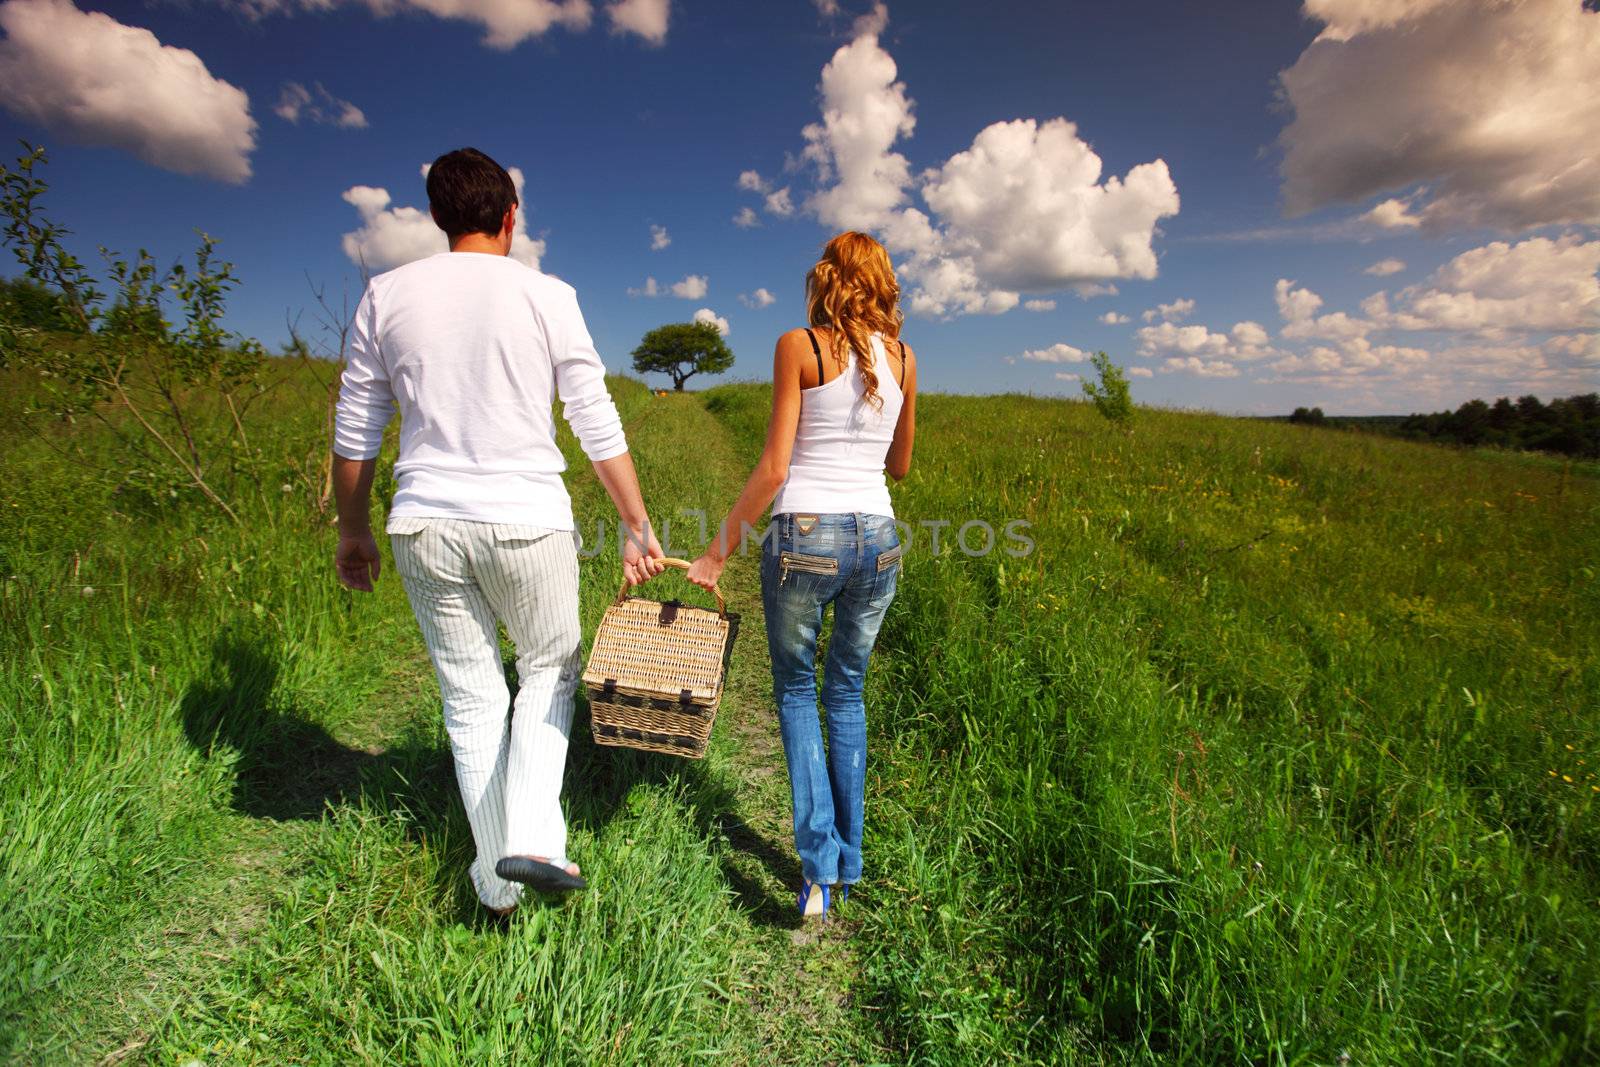 man and woman walk on picnic in green grass